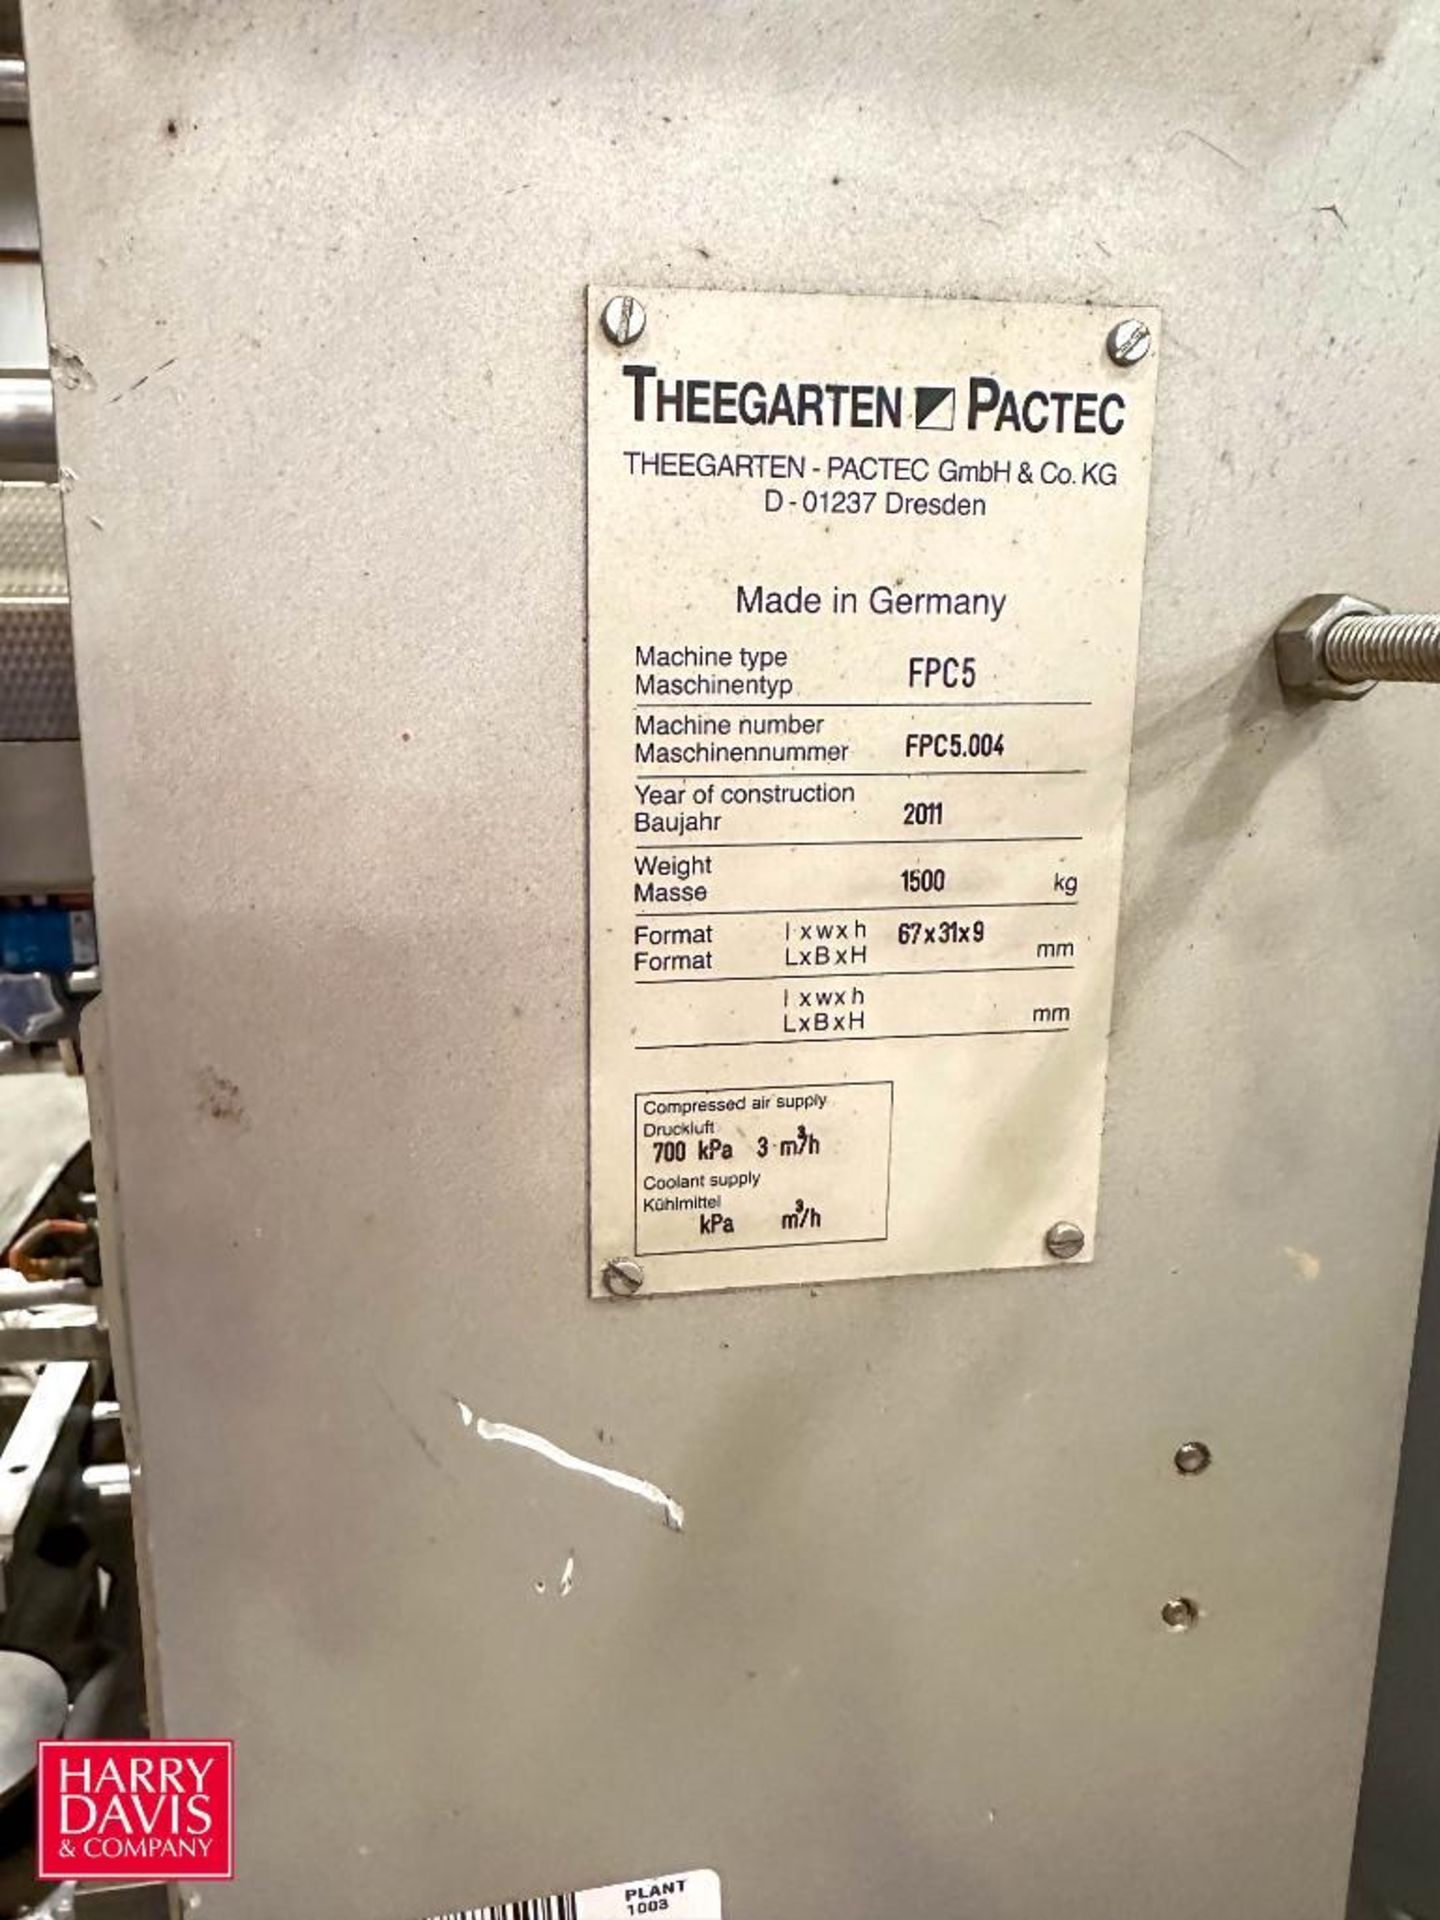 THEEGARTEN PACTEC Wrapper, Model: FPC5, S/N: FPC5004 with Vacuum Blower and Allen-Bradley PanelView - Image 4 of 4